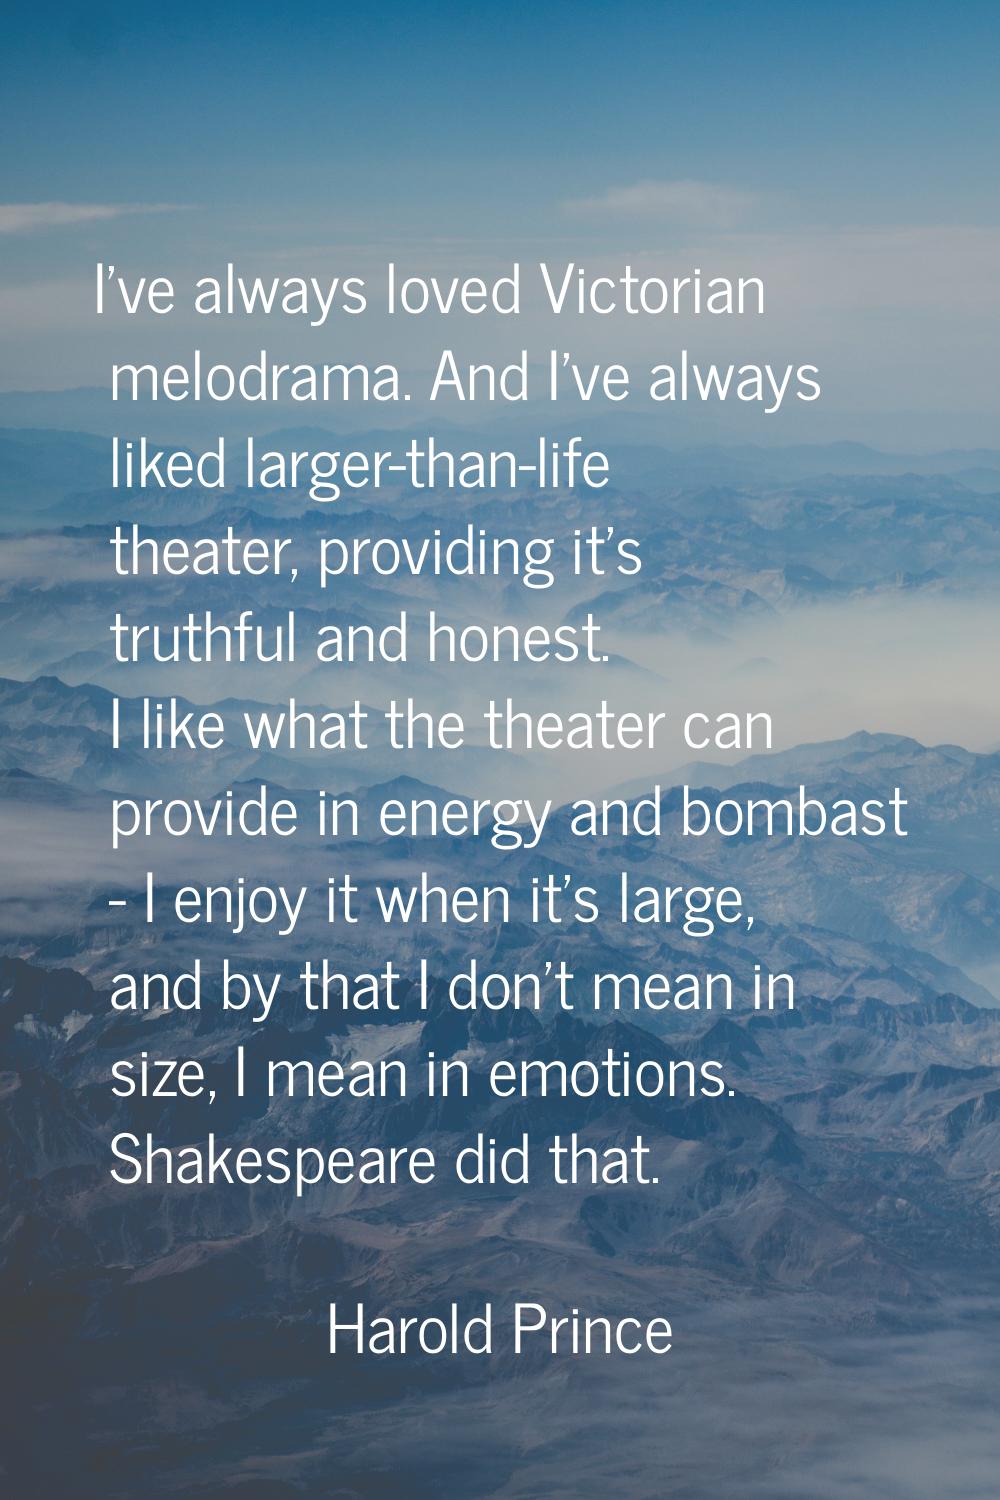 I've always loved Victorian melodrama. And I've always liked larger-than-life theater, providing it